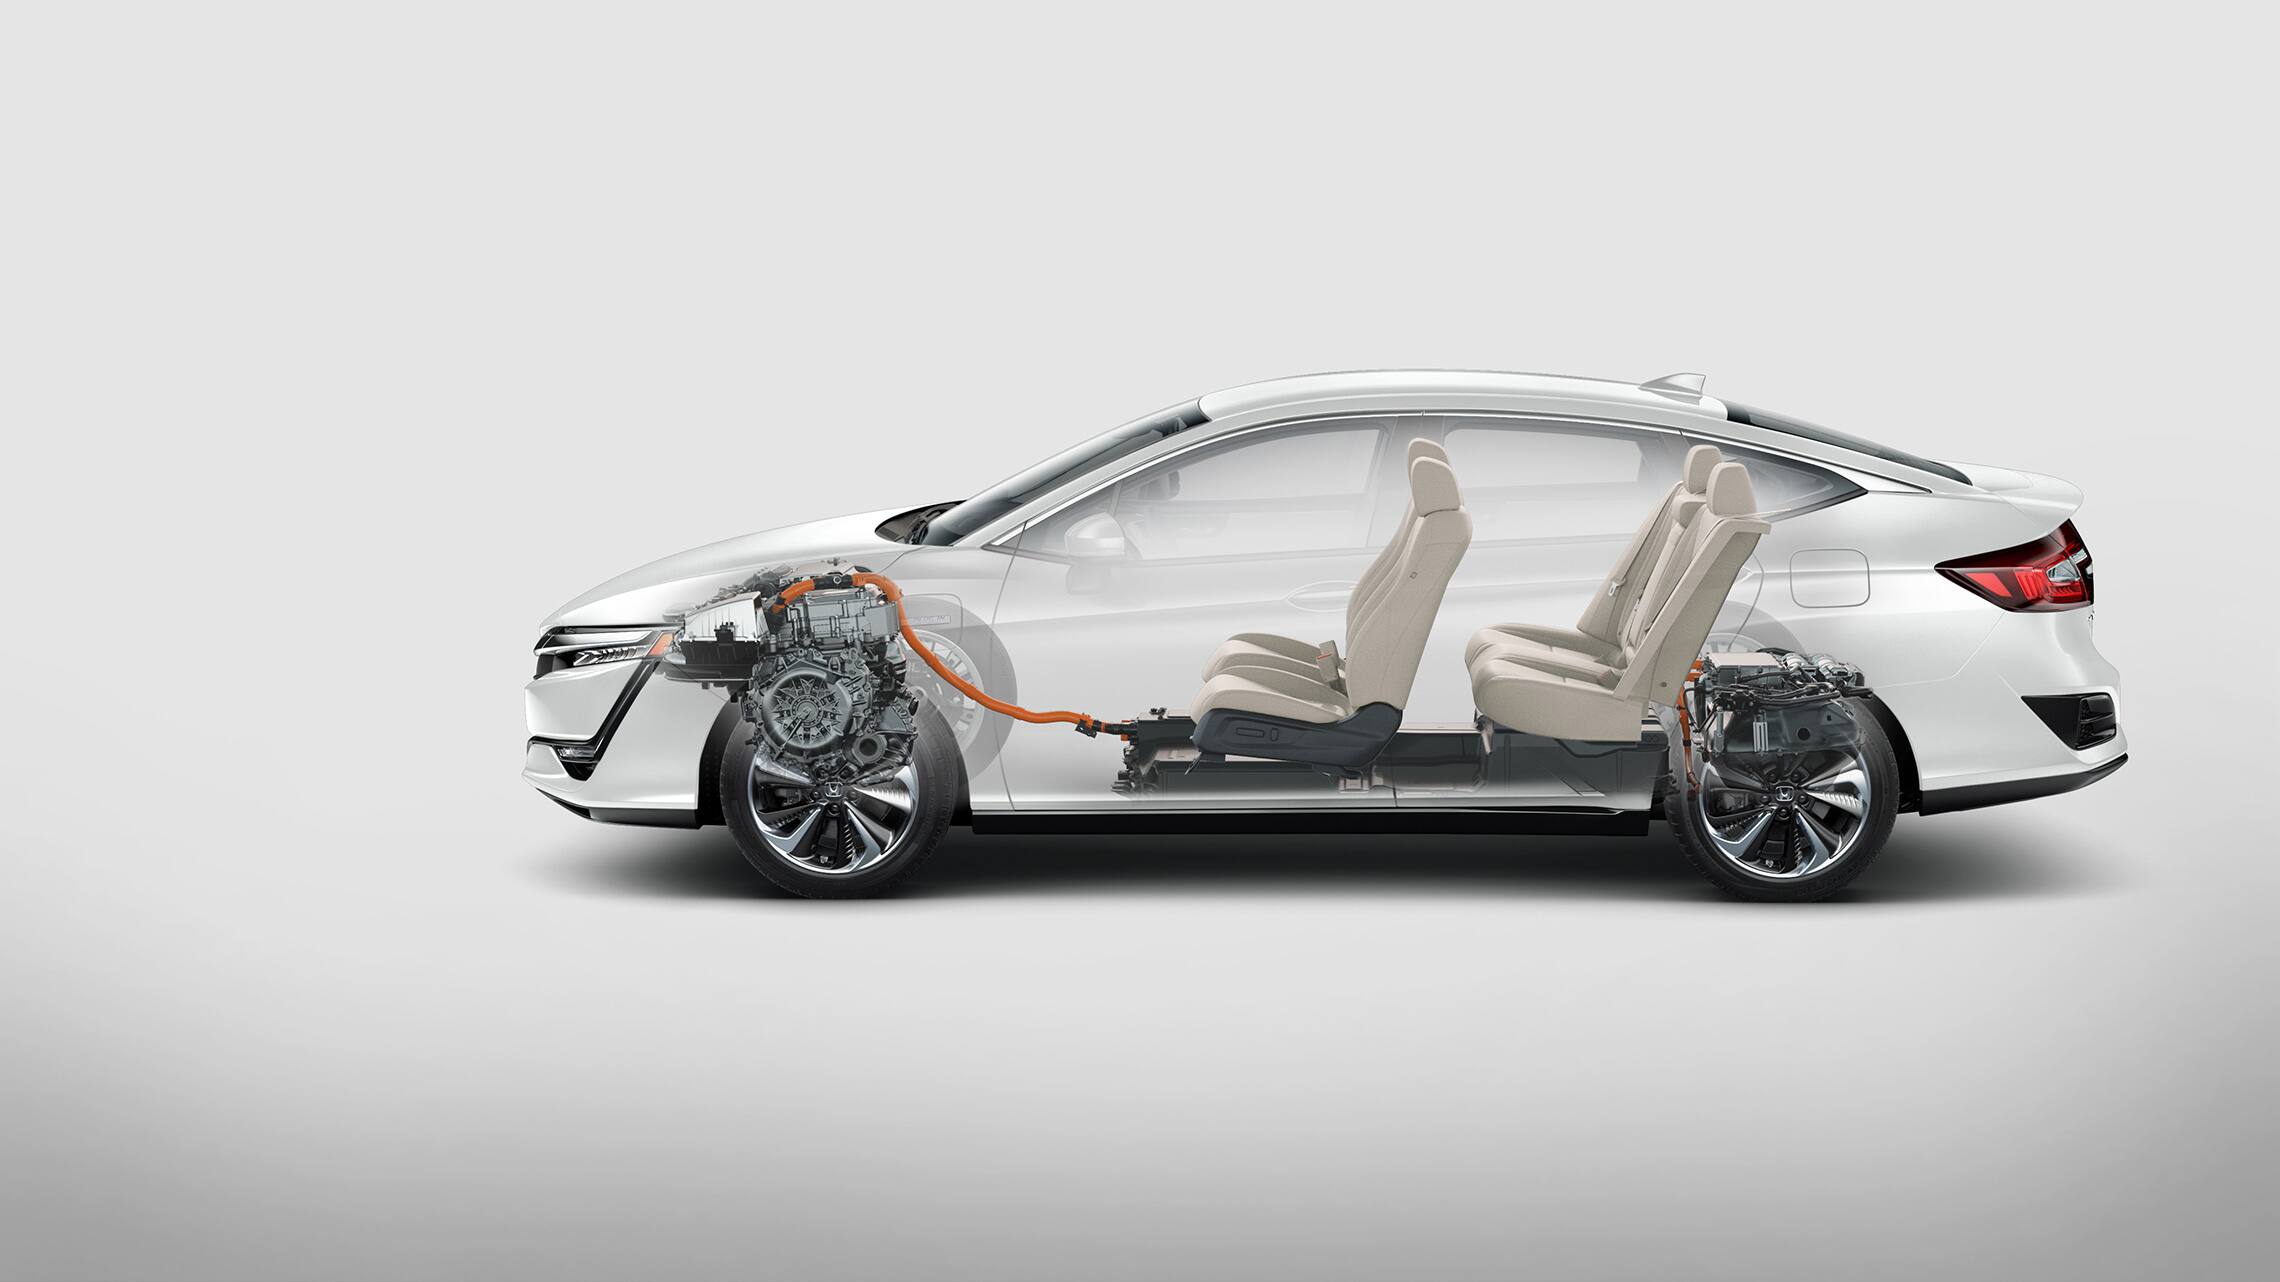 Side profile of 2021 Clarity Plug-In Hybrid with interior shown.